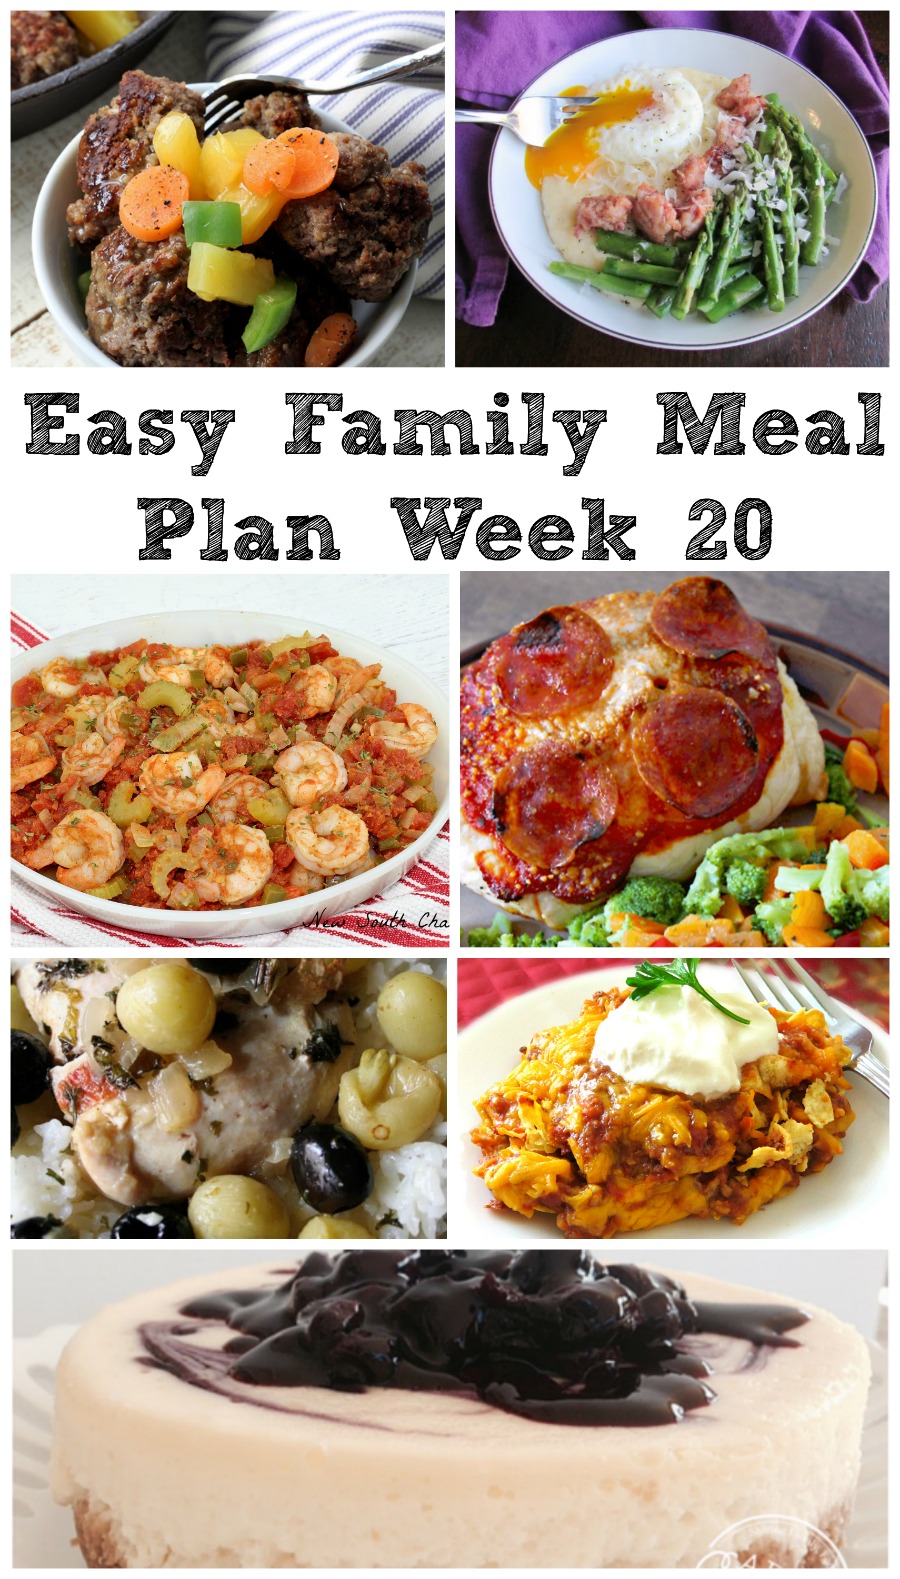 Cooking With Carlee: Easy Family Meal Plan Week 20